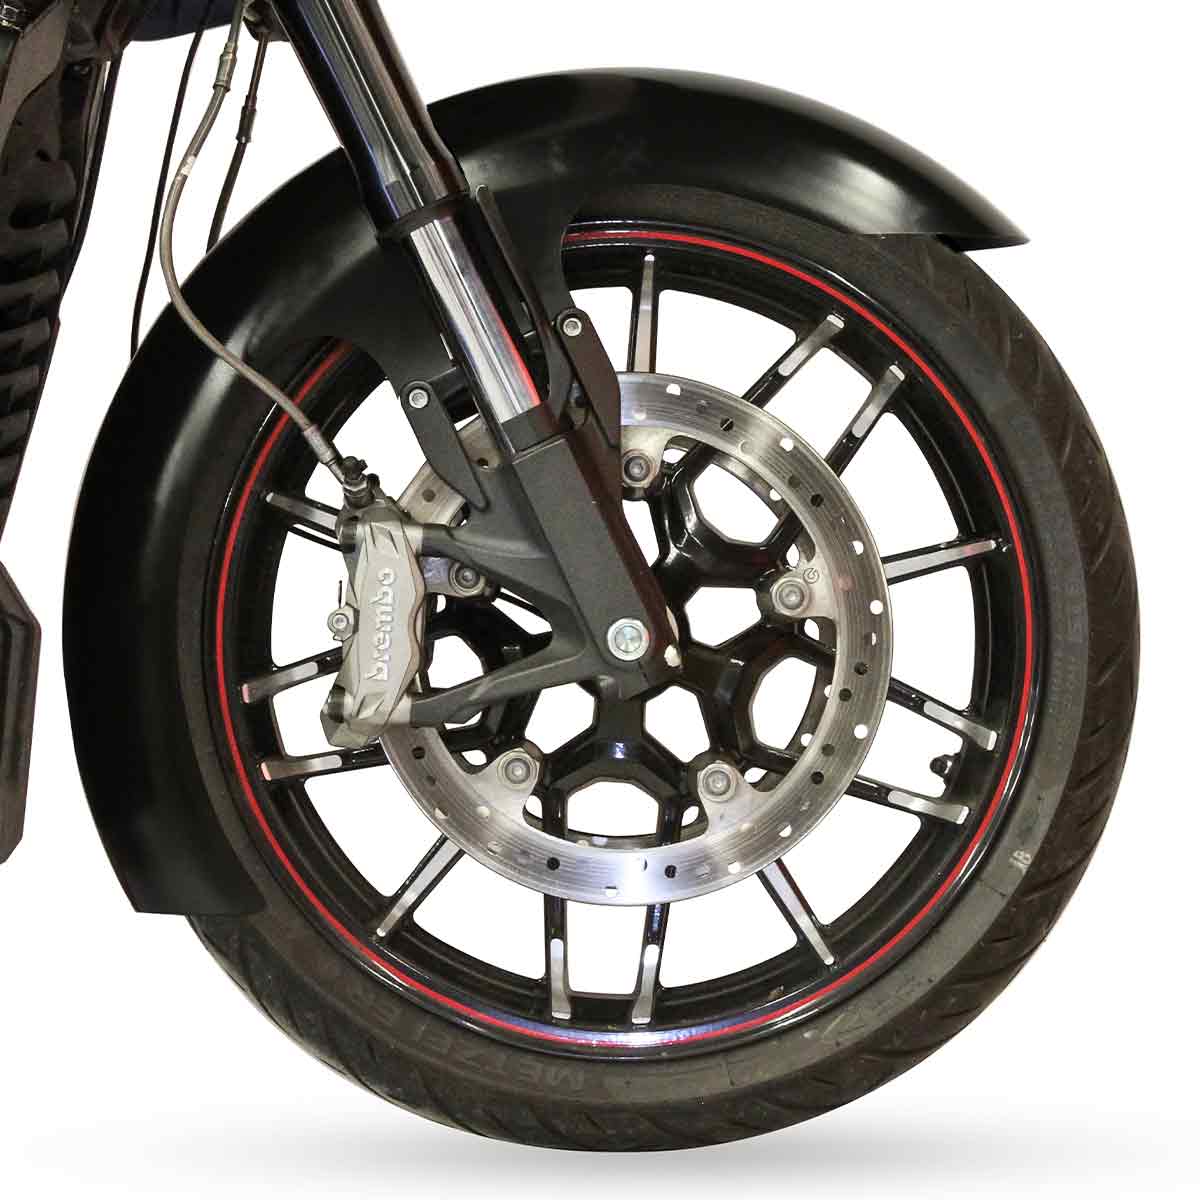 Slicer Tire Hugger Front Fenders for Indian® Challenger, Pursuit and Sport Chief Motorcycles